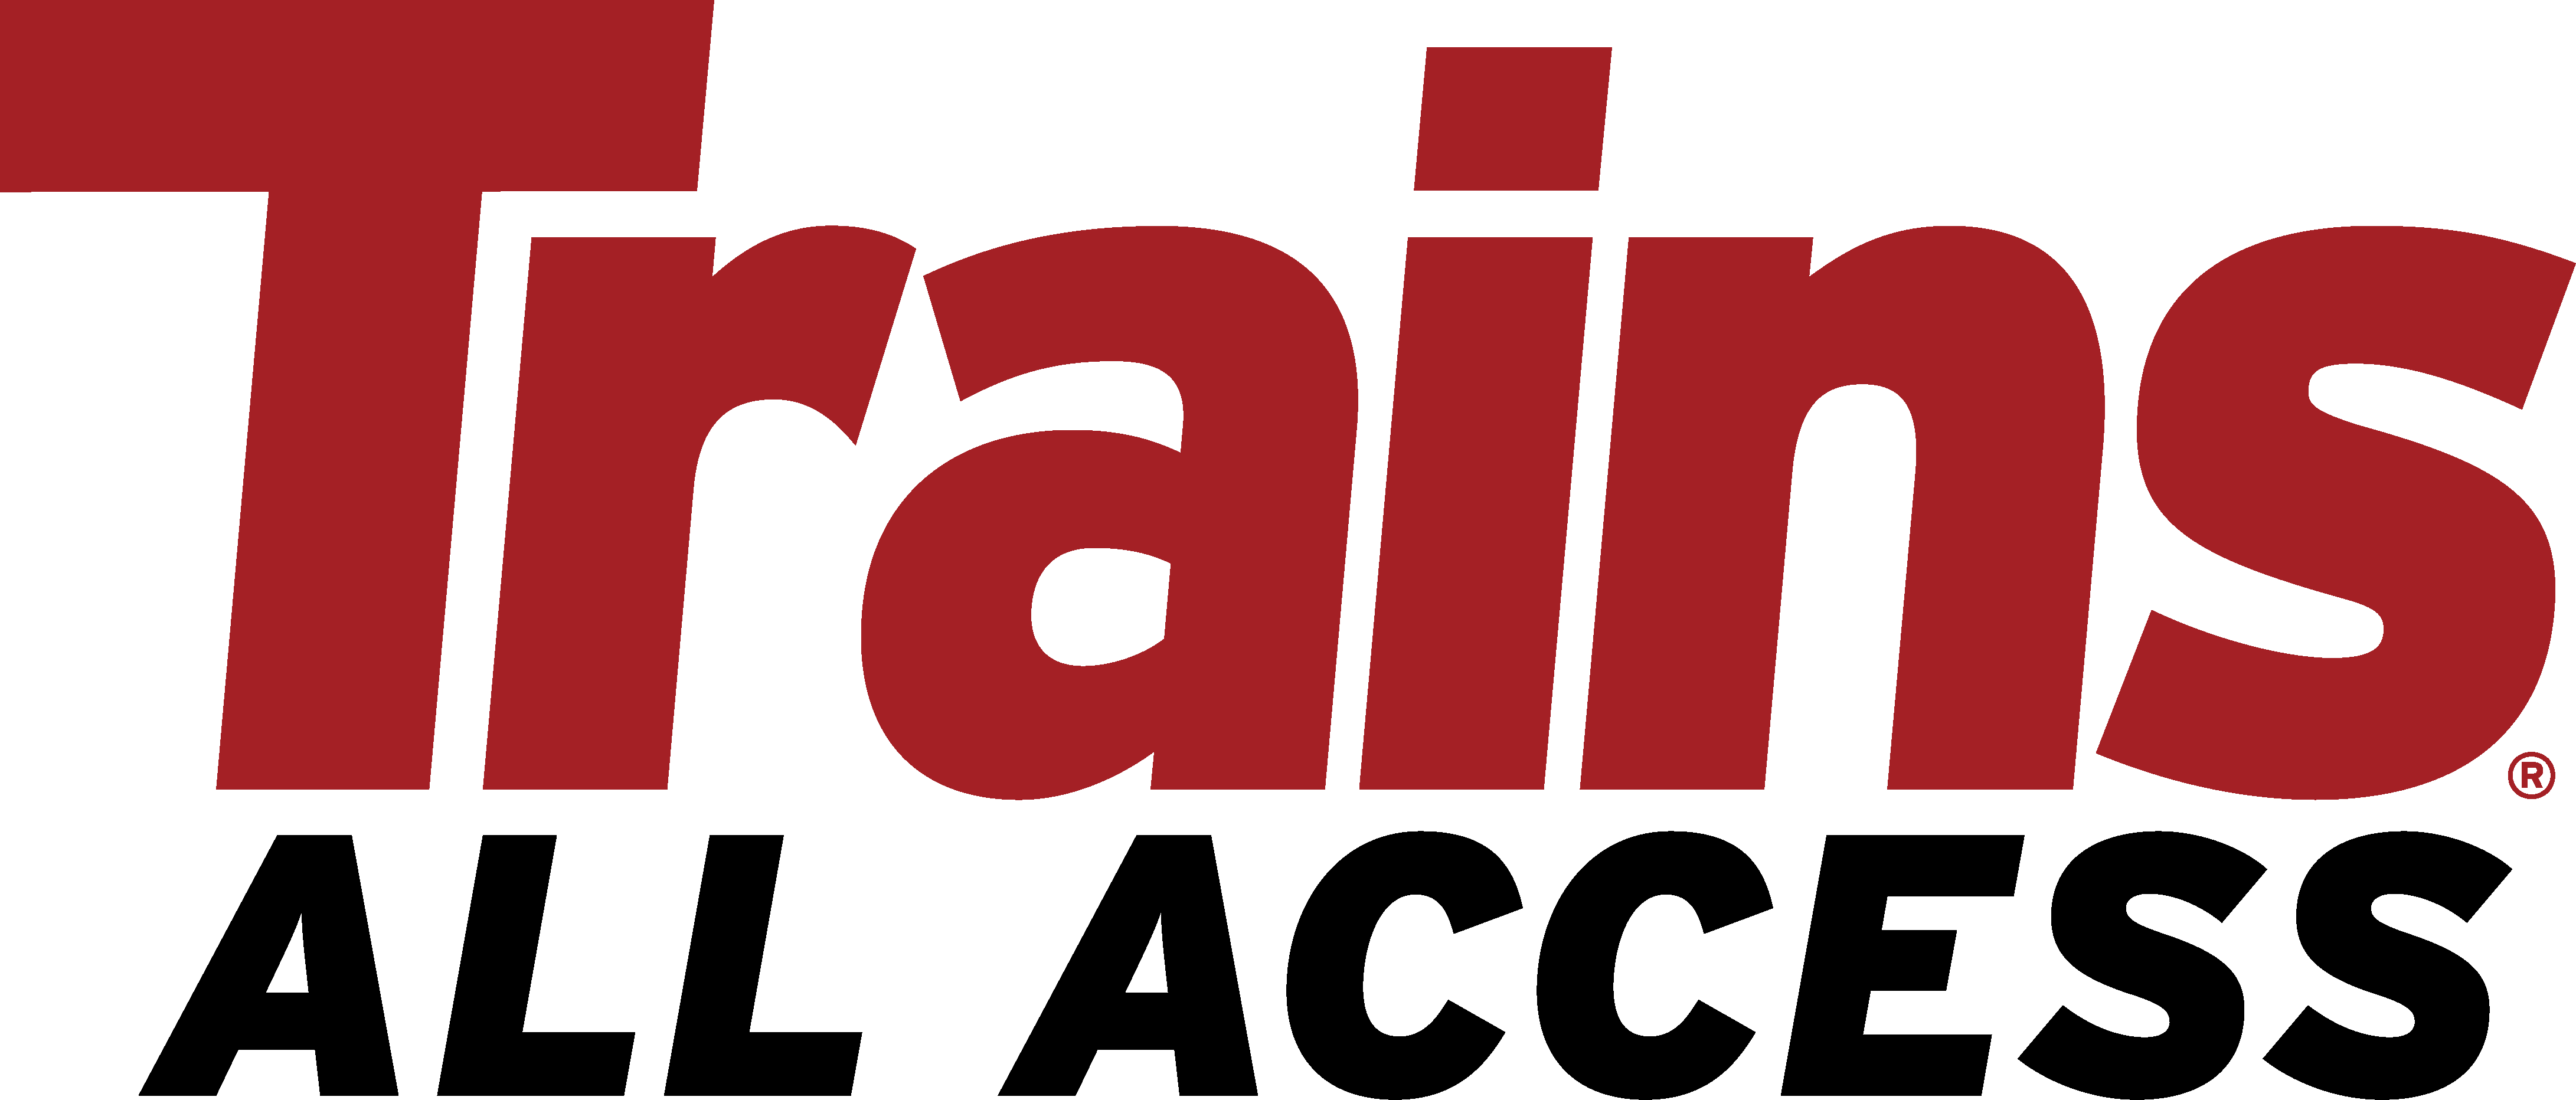 Trains.com logo next to a grey t-shirt that features the logo on the left chest area